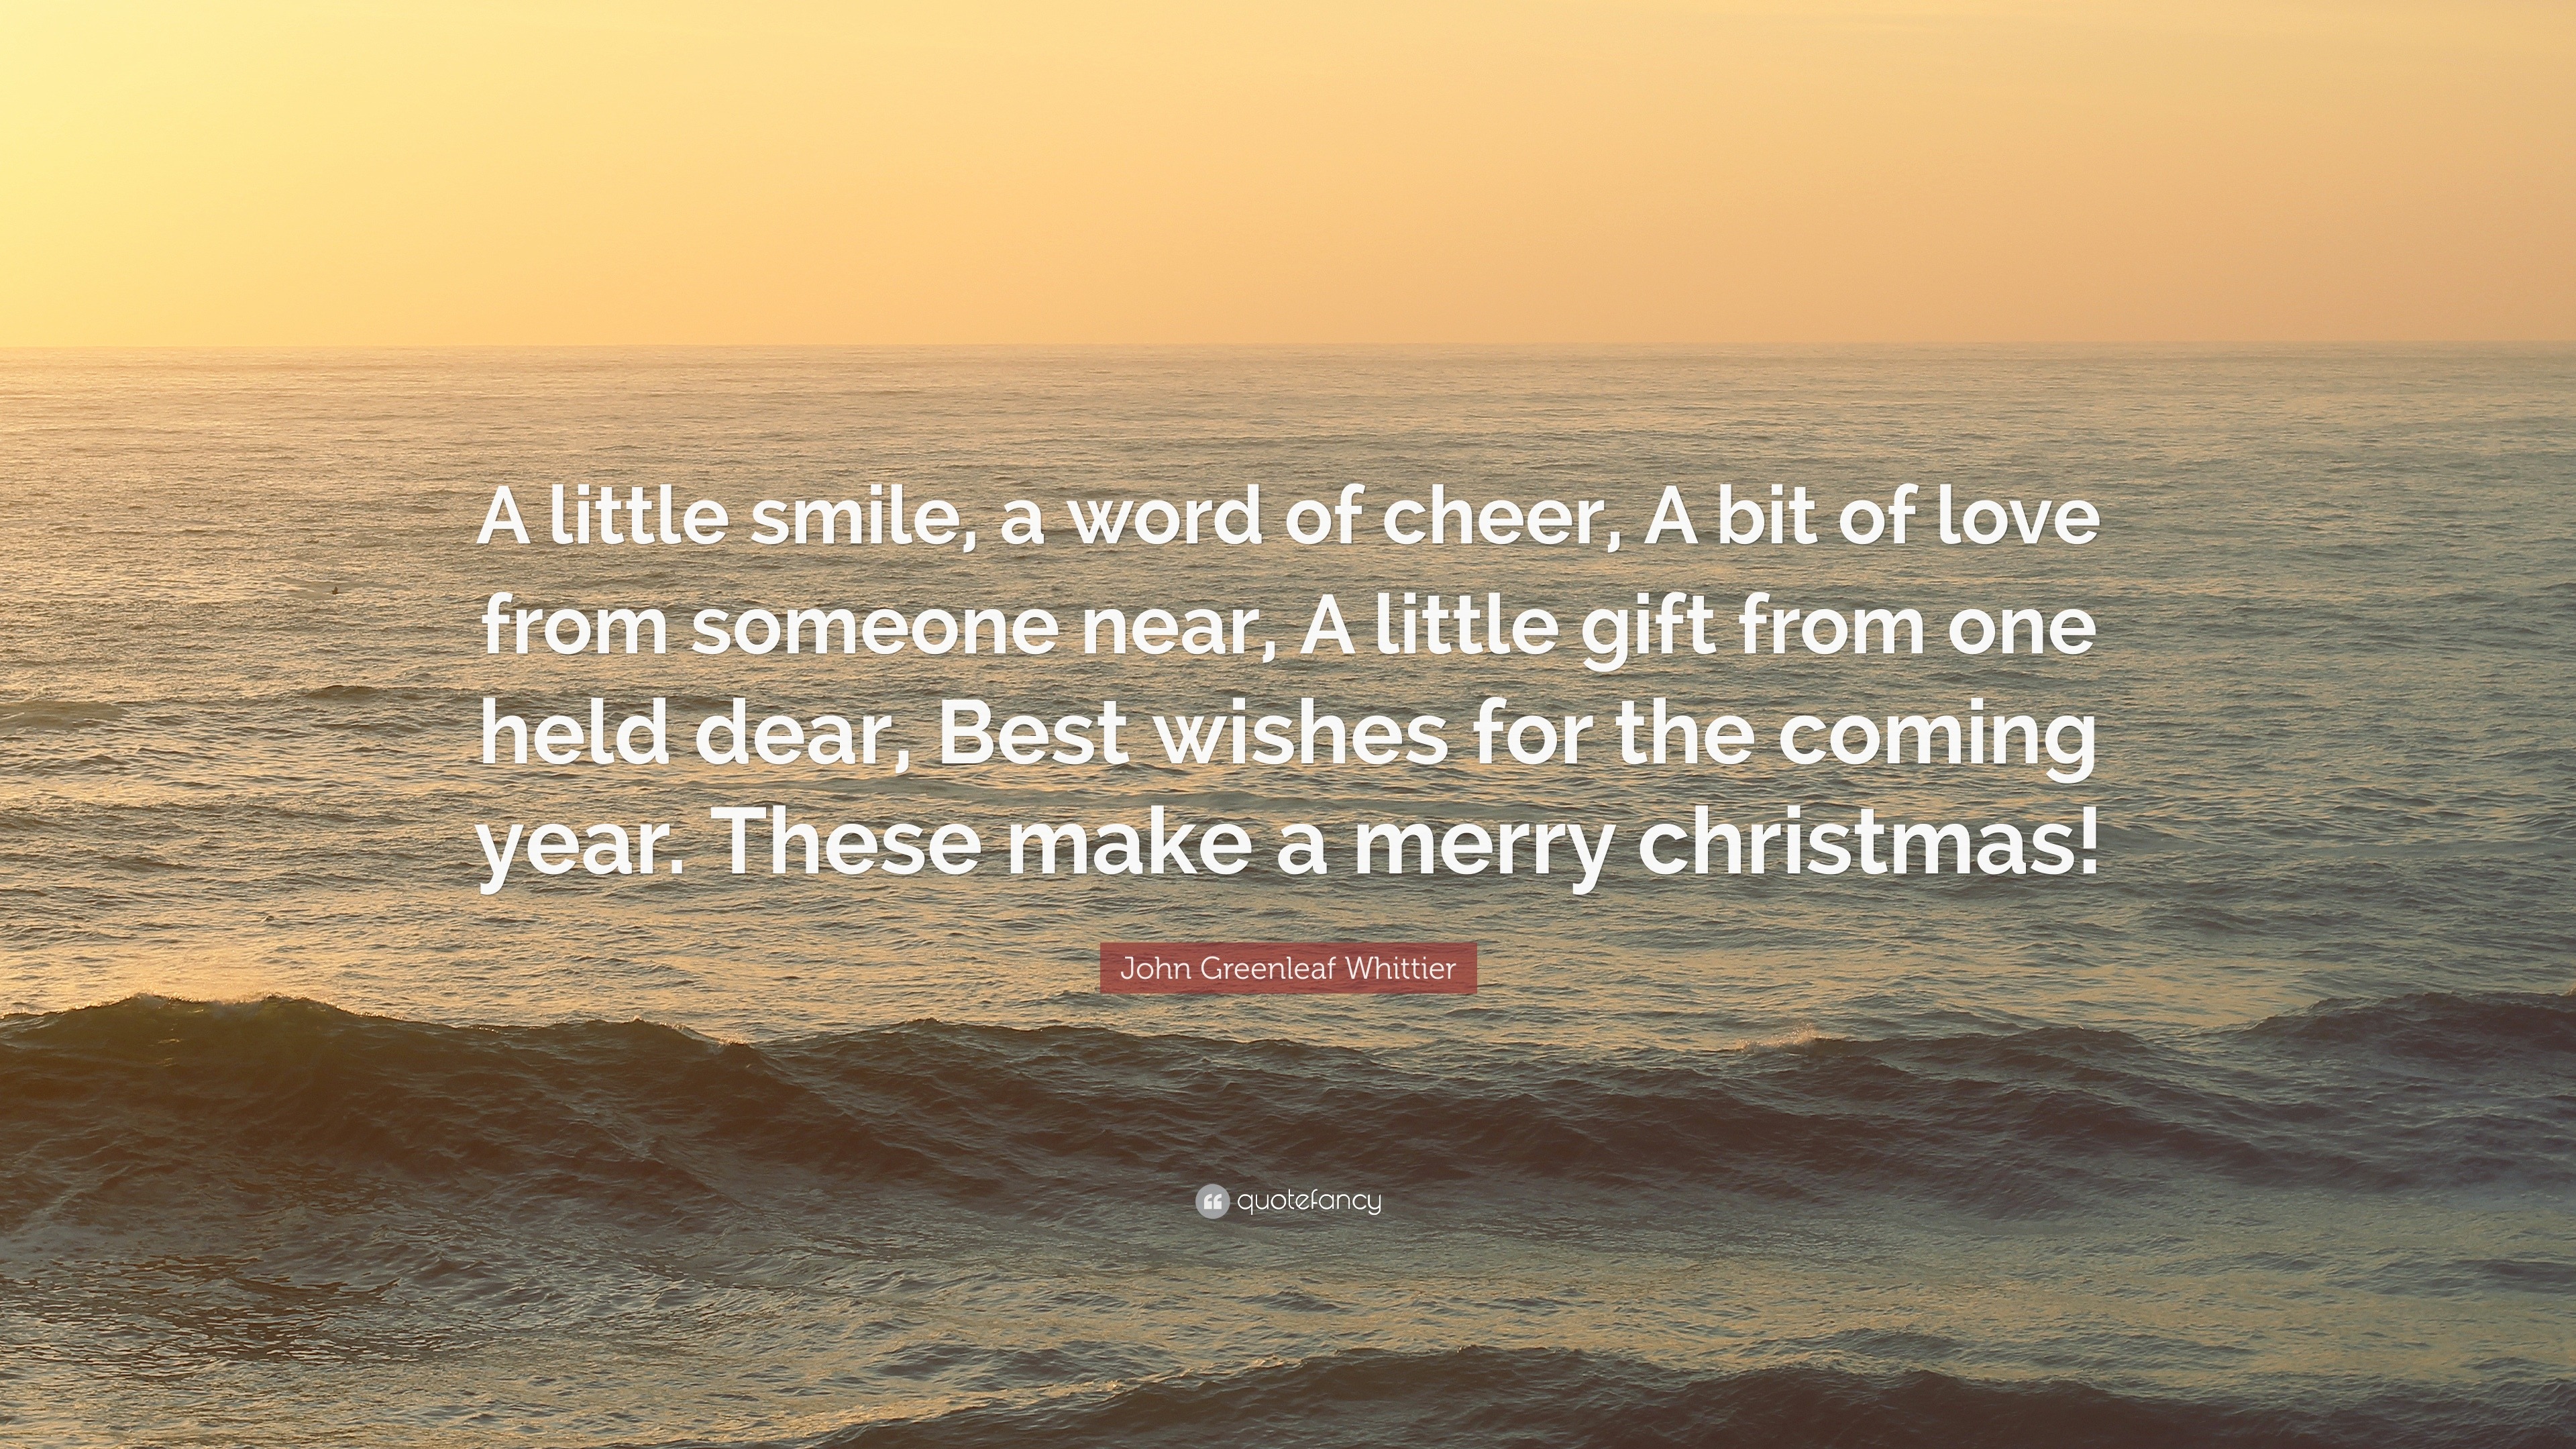 John Greenleaf Whittier Quote “A little smile a word of cheer A